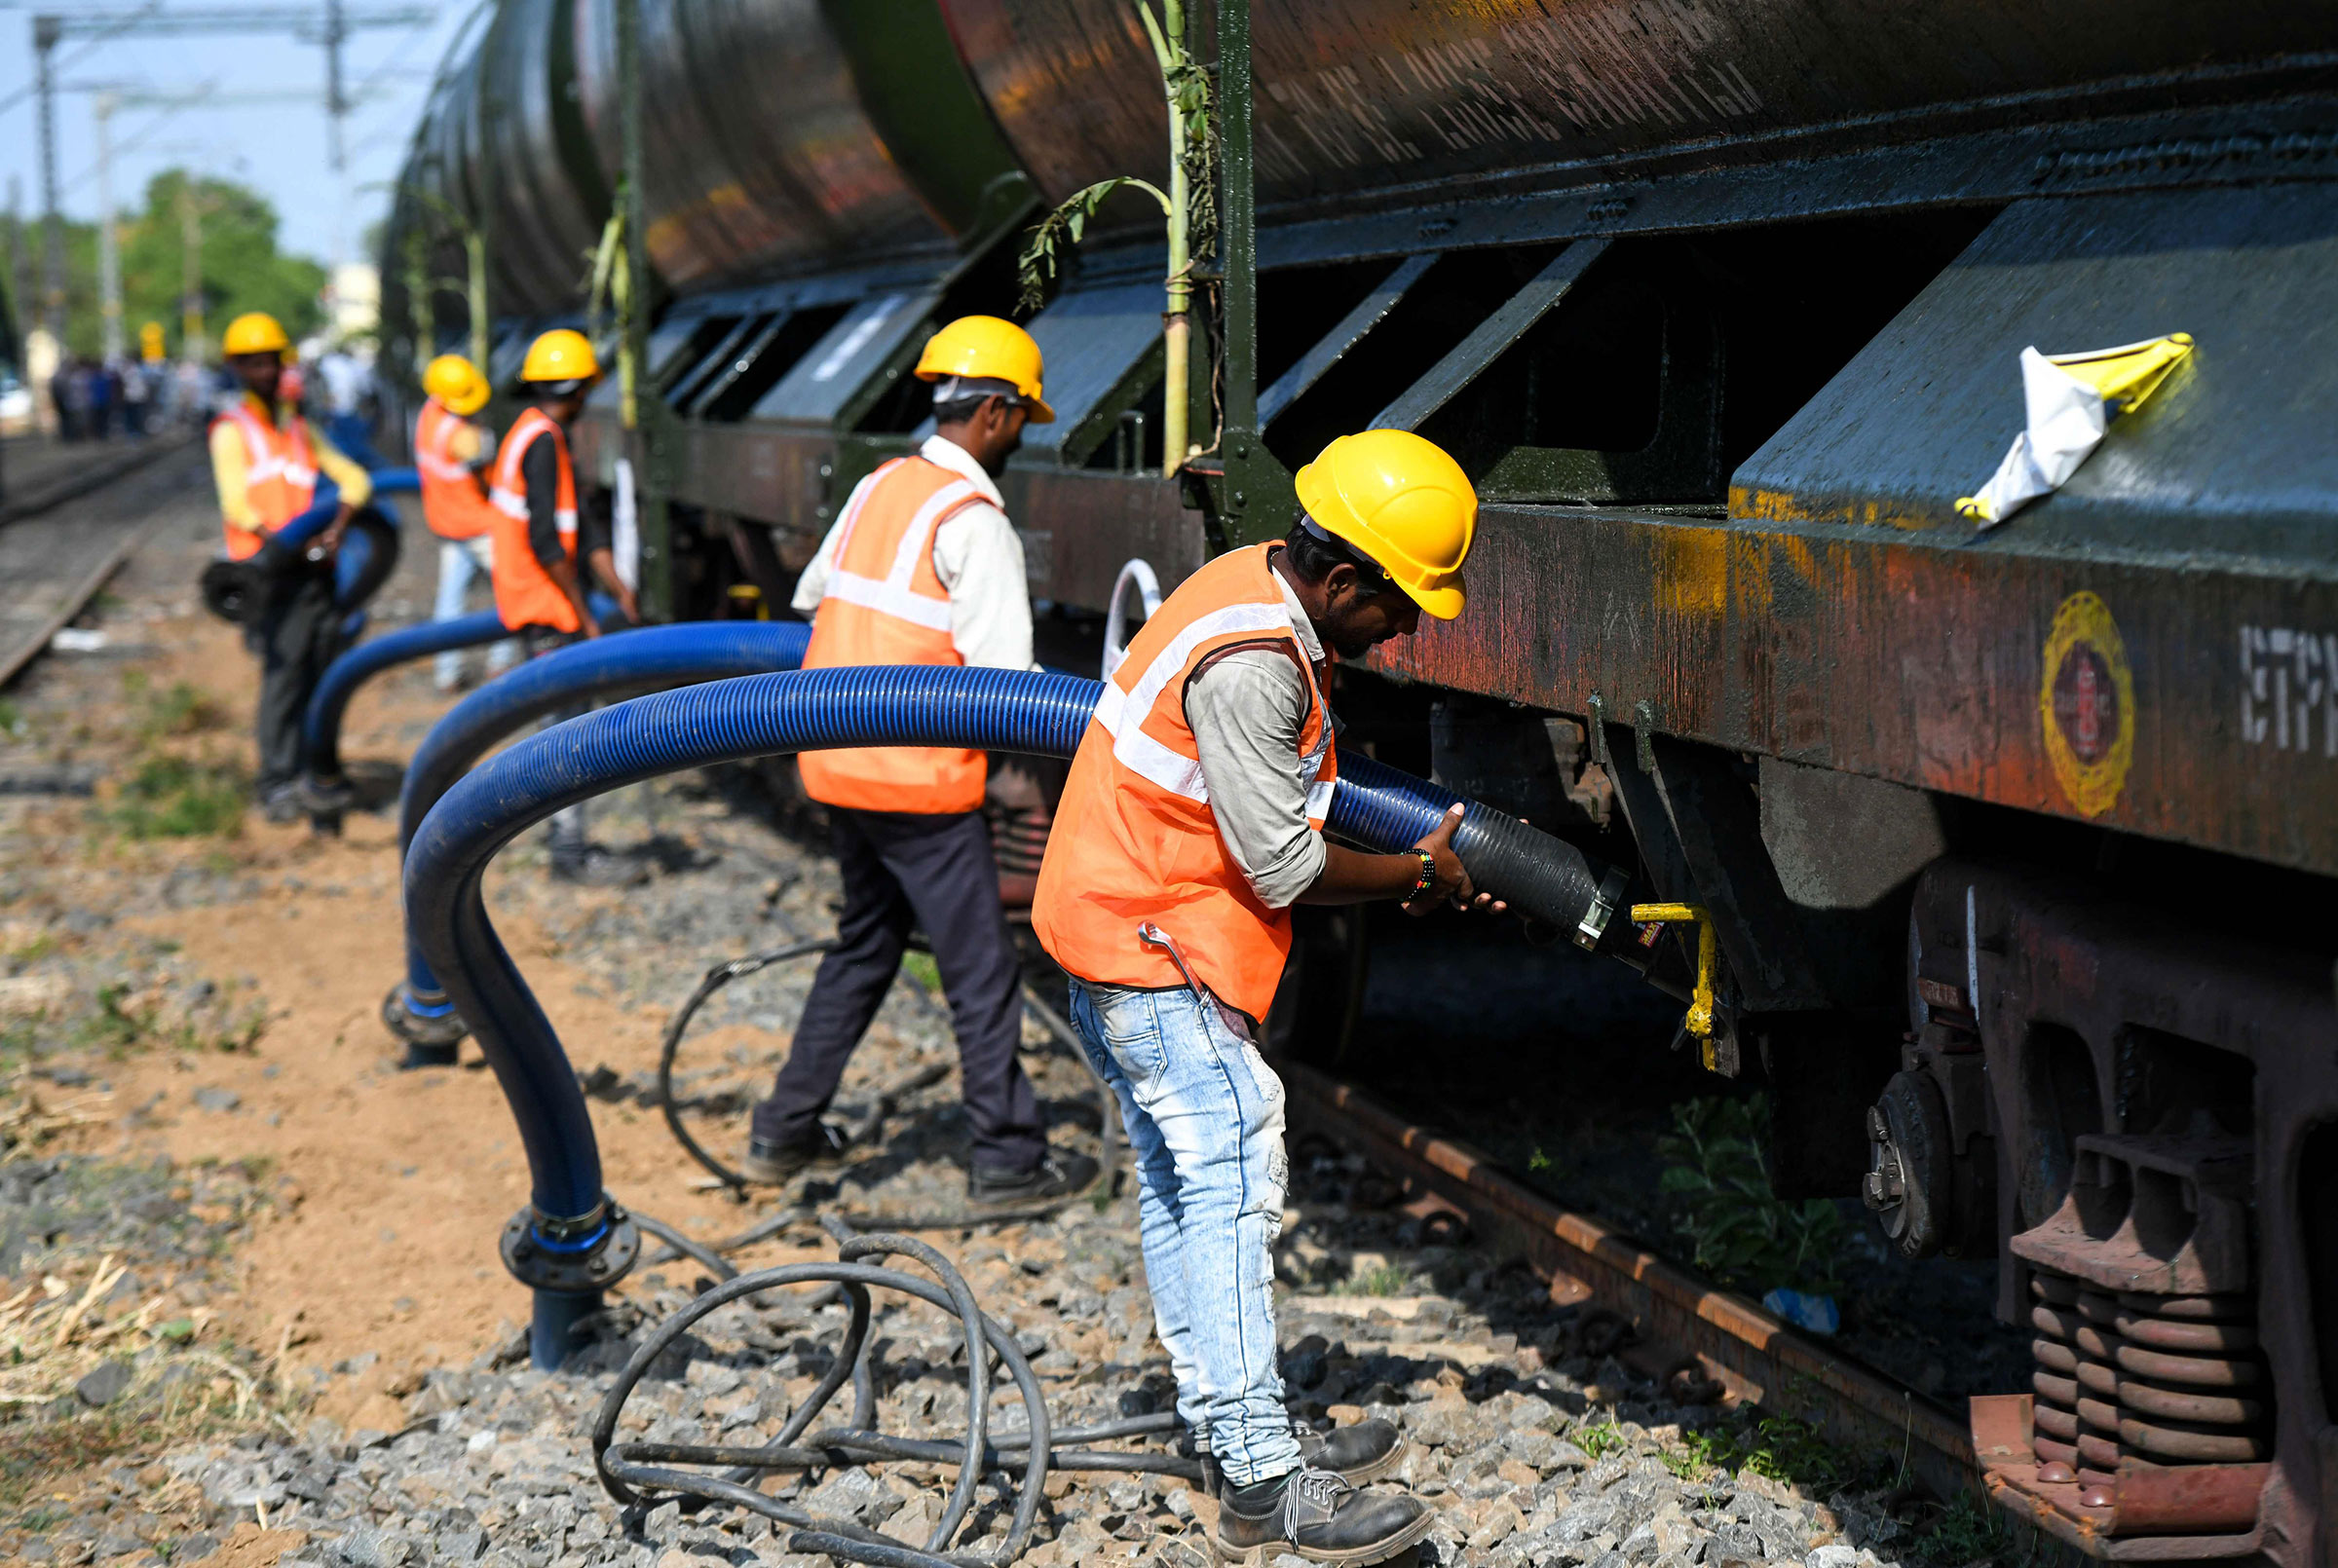 Indian laborers connect pipes to collect water from a train carrying liters of water at a railway station in Chennai on July 12. (Arun Sankar—AFP/Getty Images)